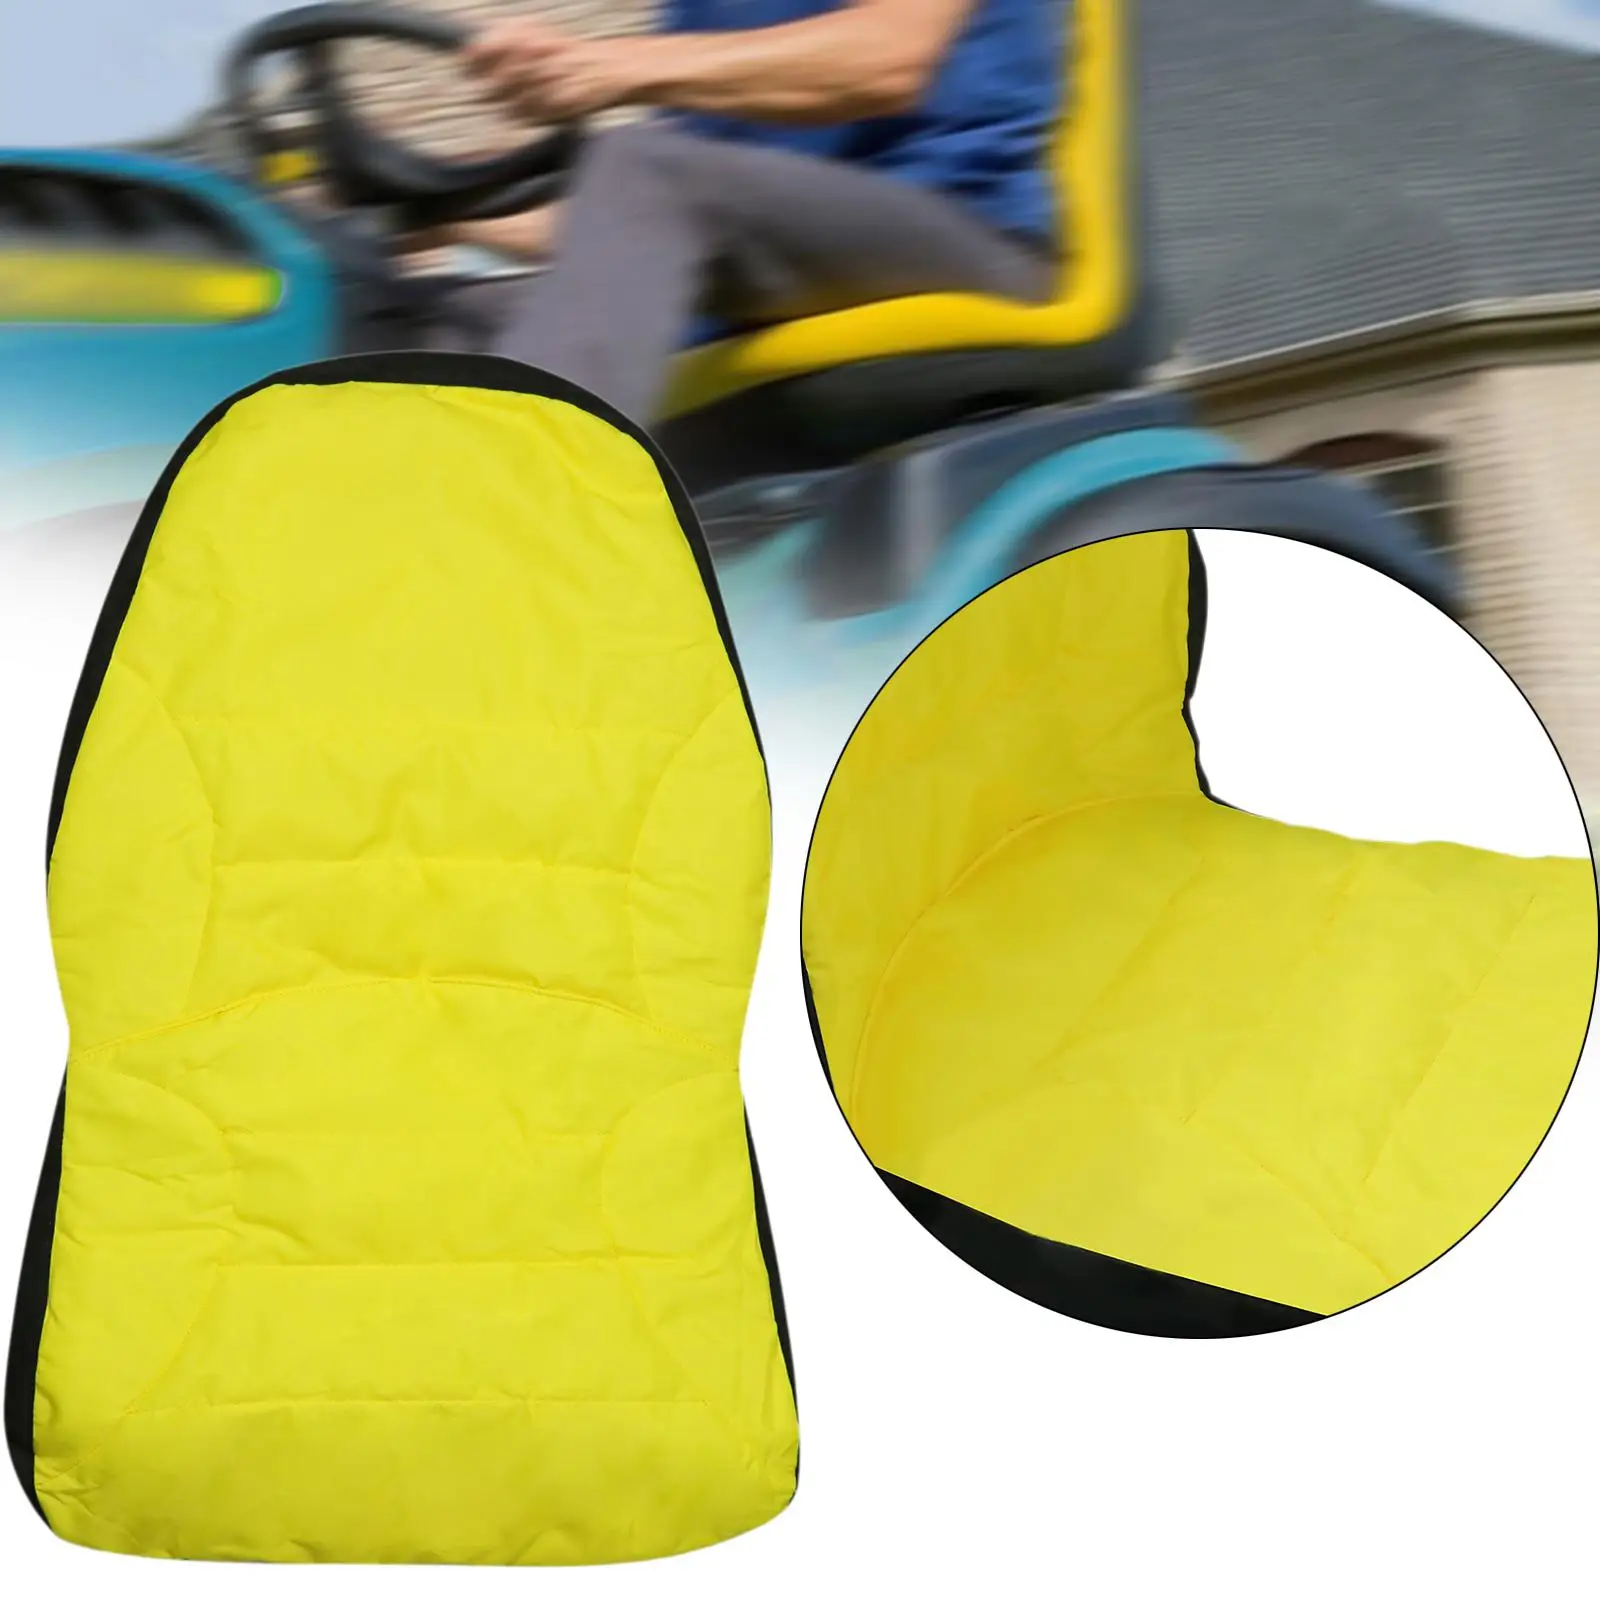 Compact Utility Tractor Seat Cover, LP95233 Cushioned Seat, Large 18inch for 1023E 3R Series